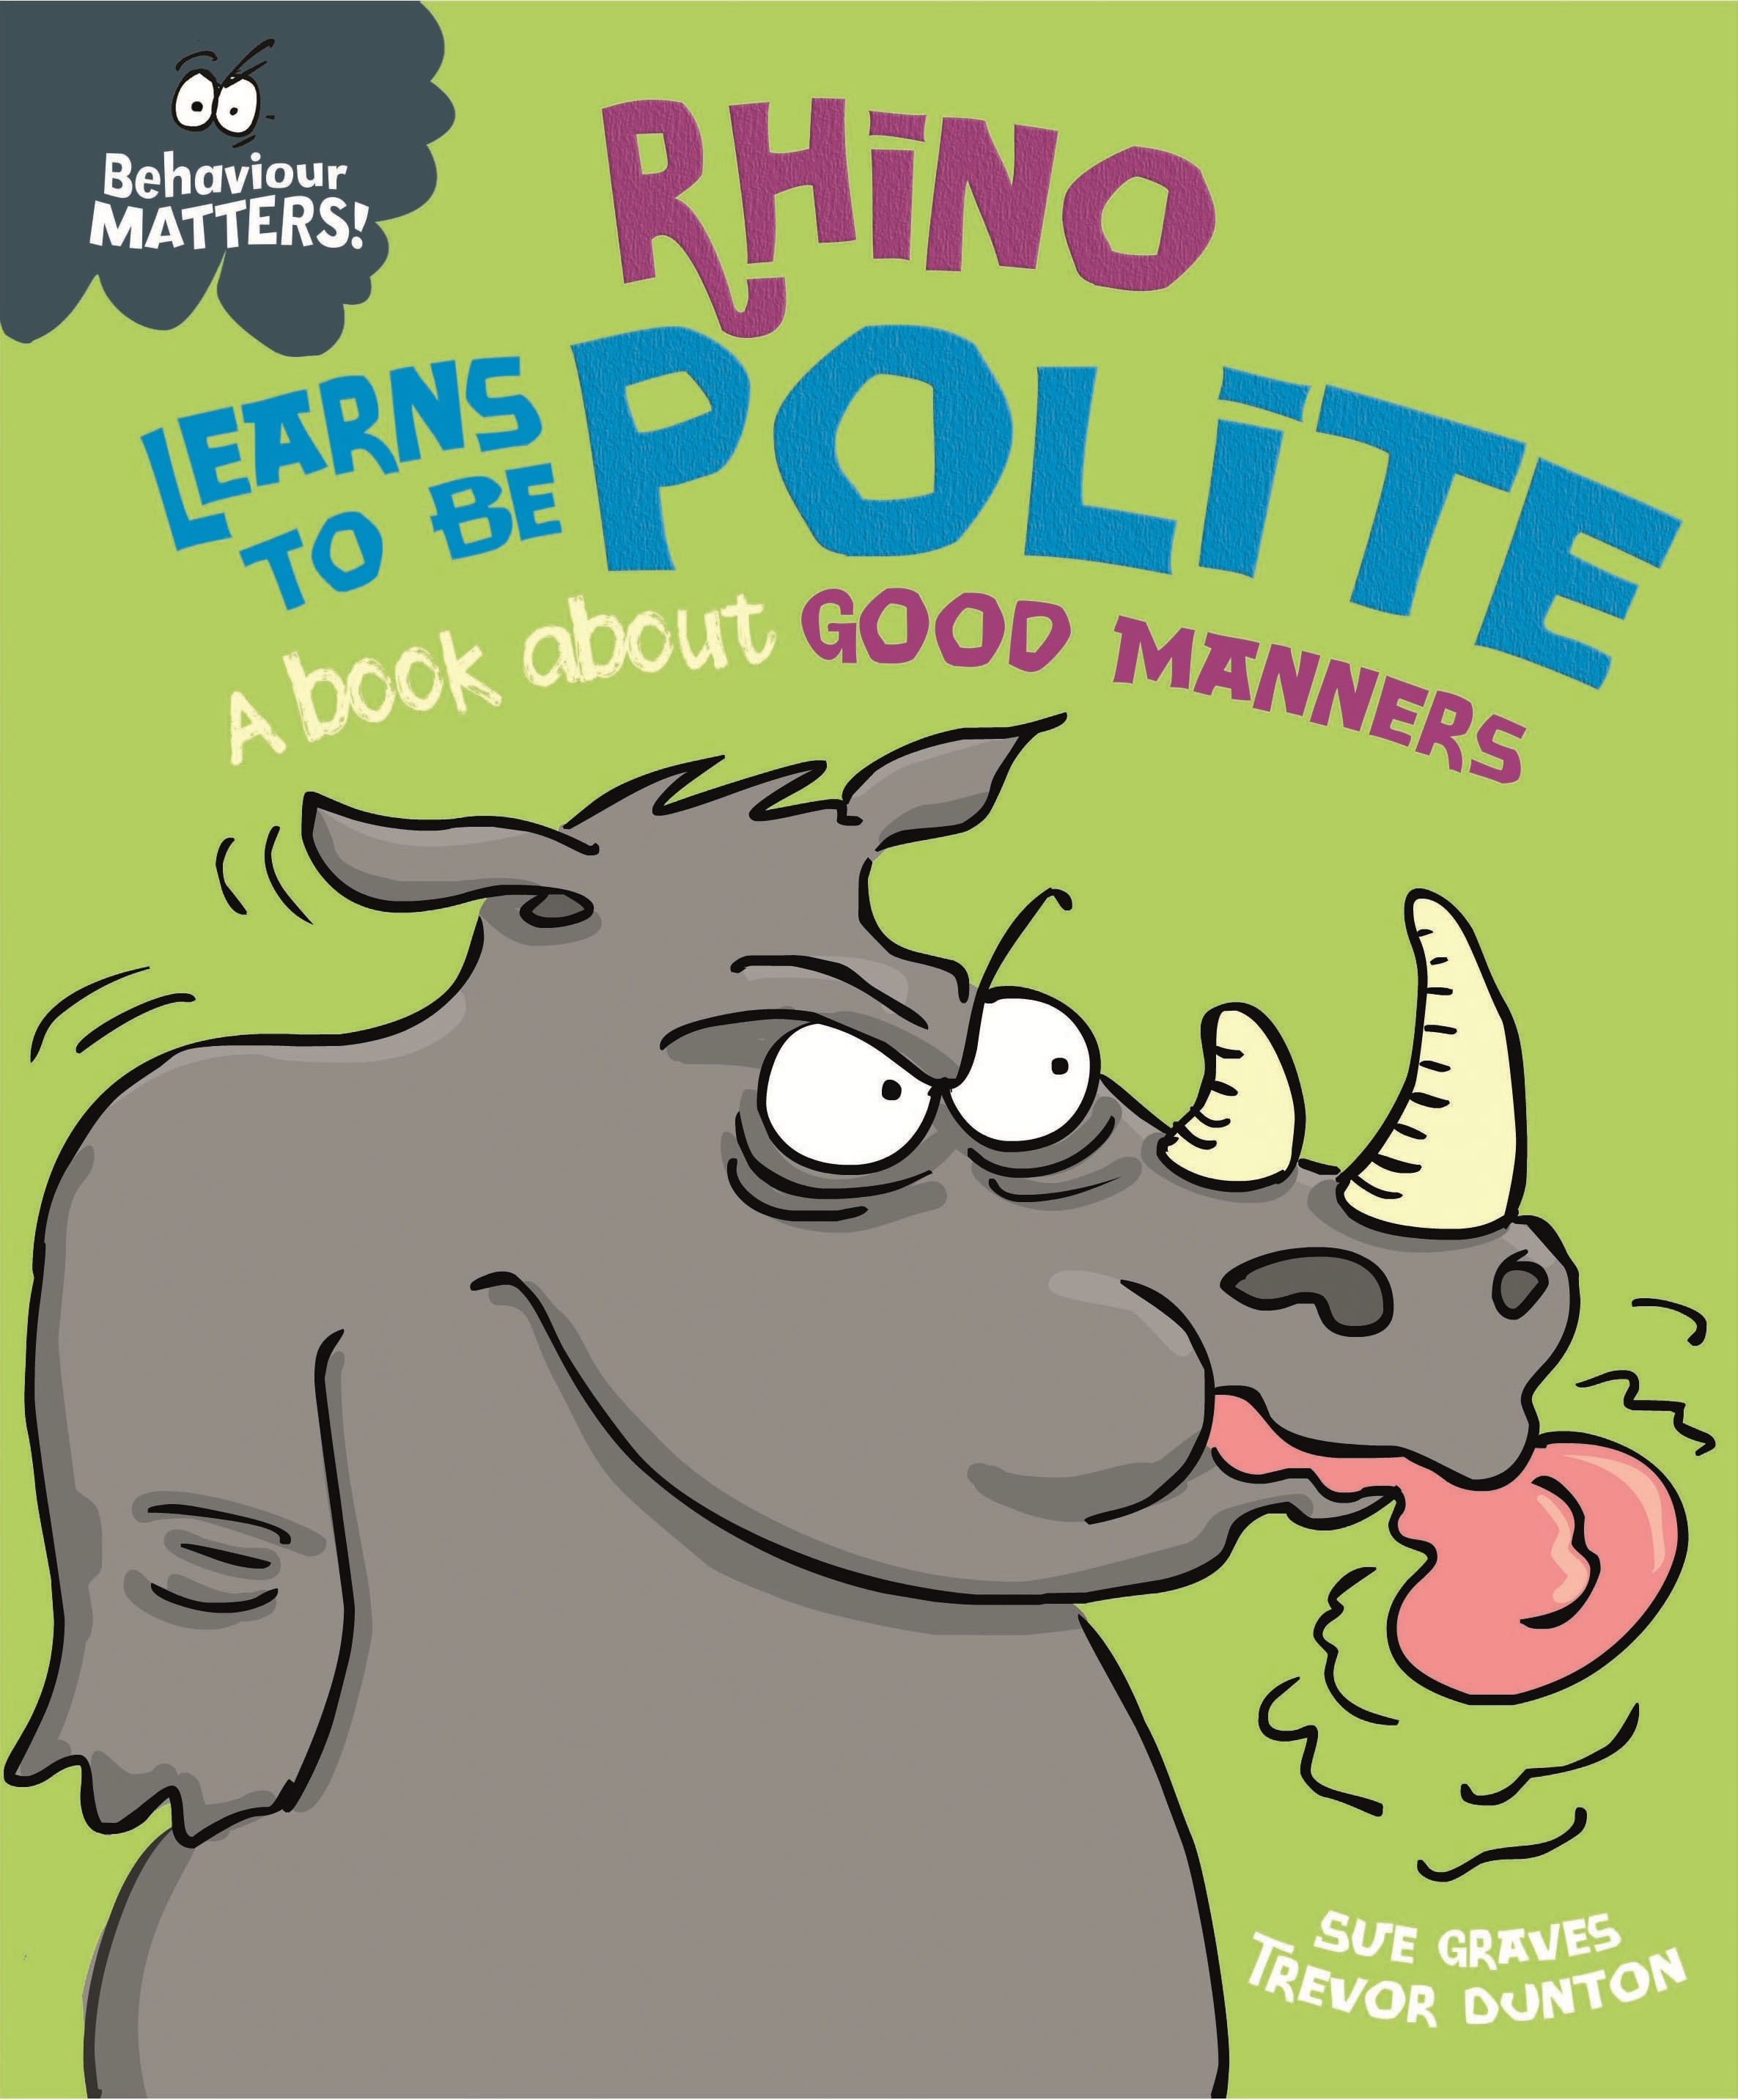 Behaviour Matters: Rhino Learns to be Polite - A book about good manners by  Sue Graves | Hachette UK